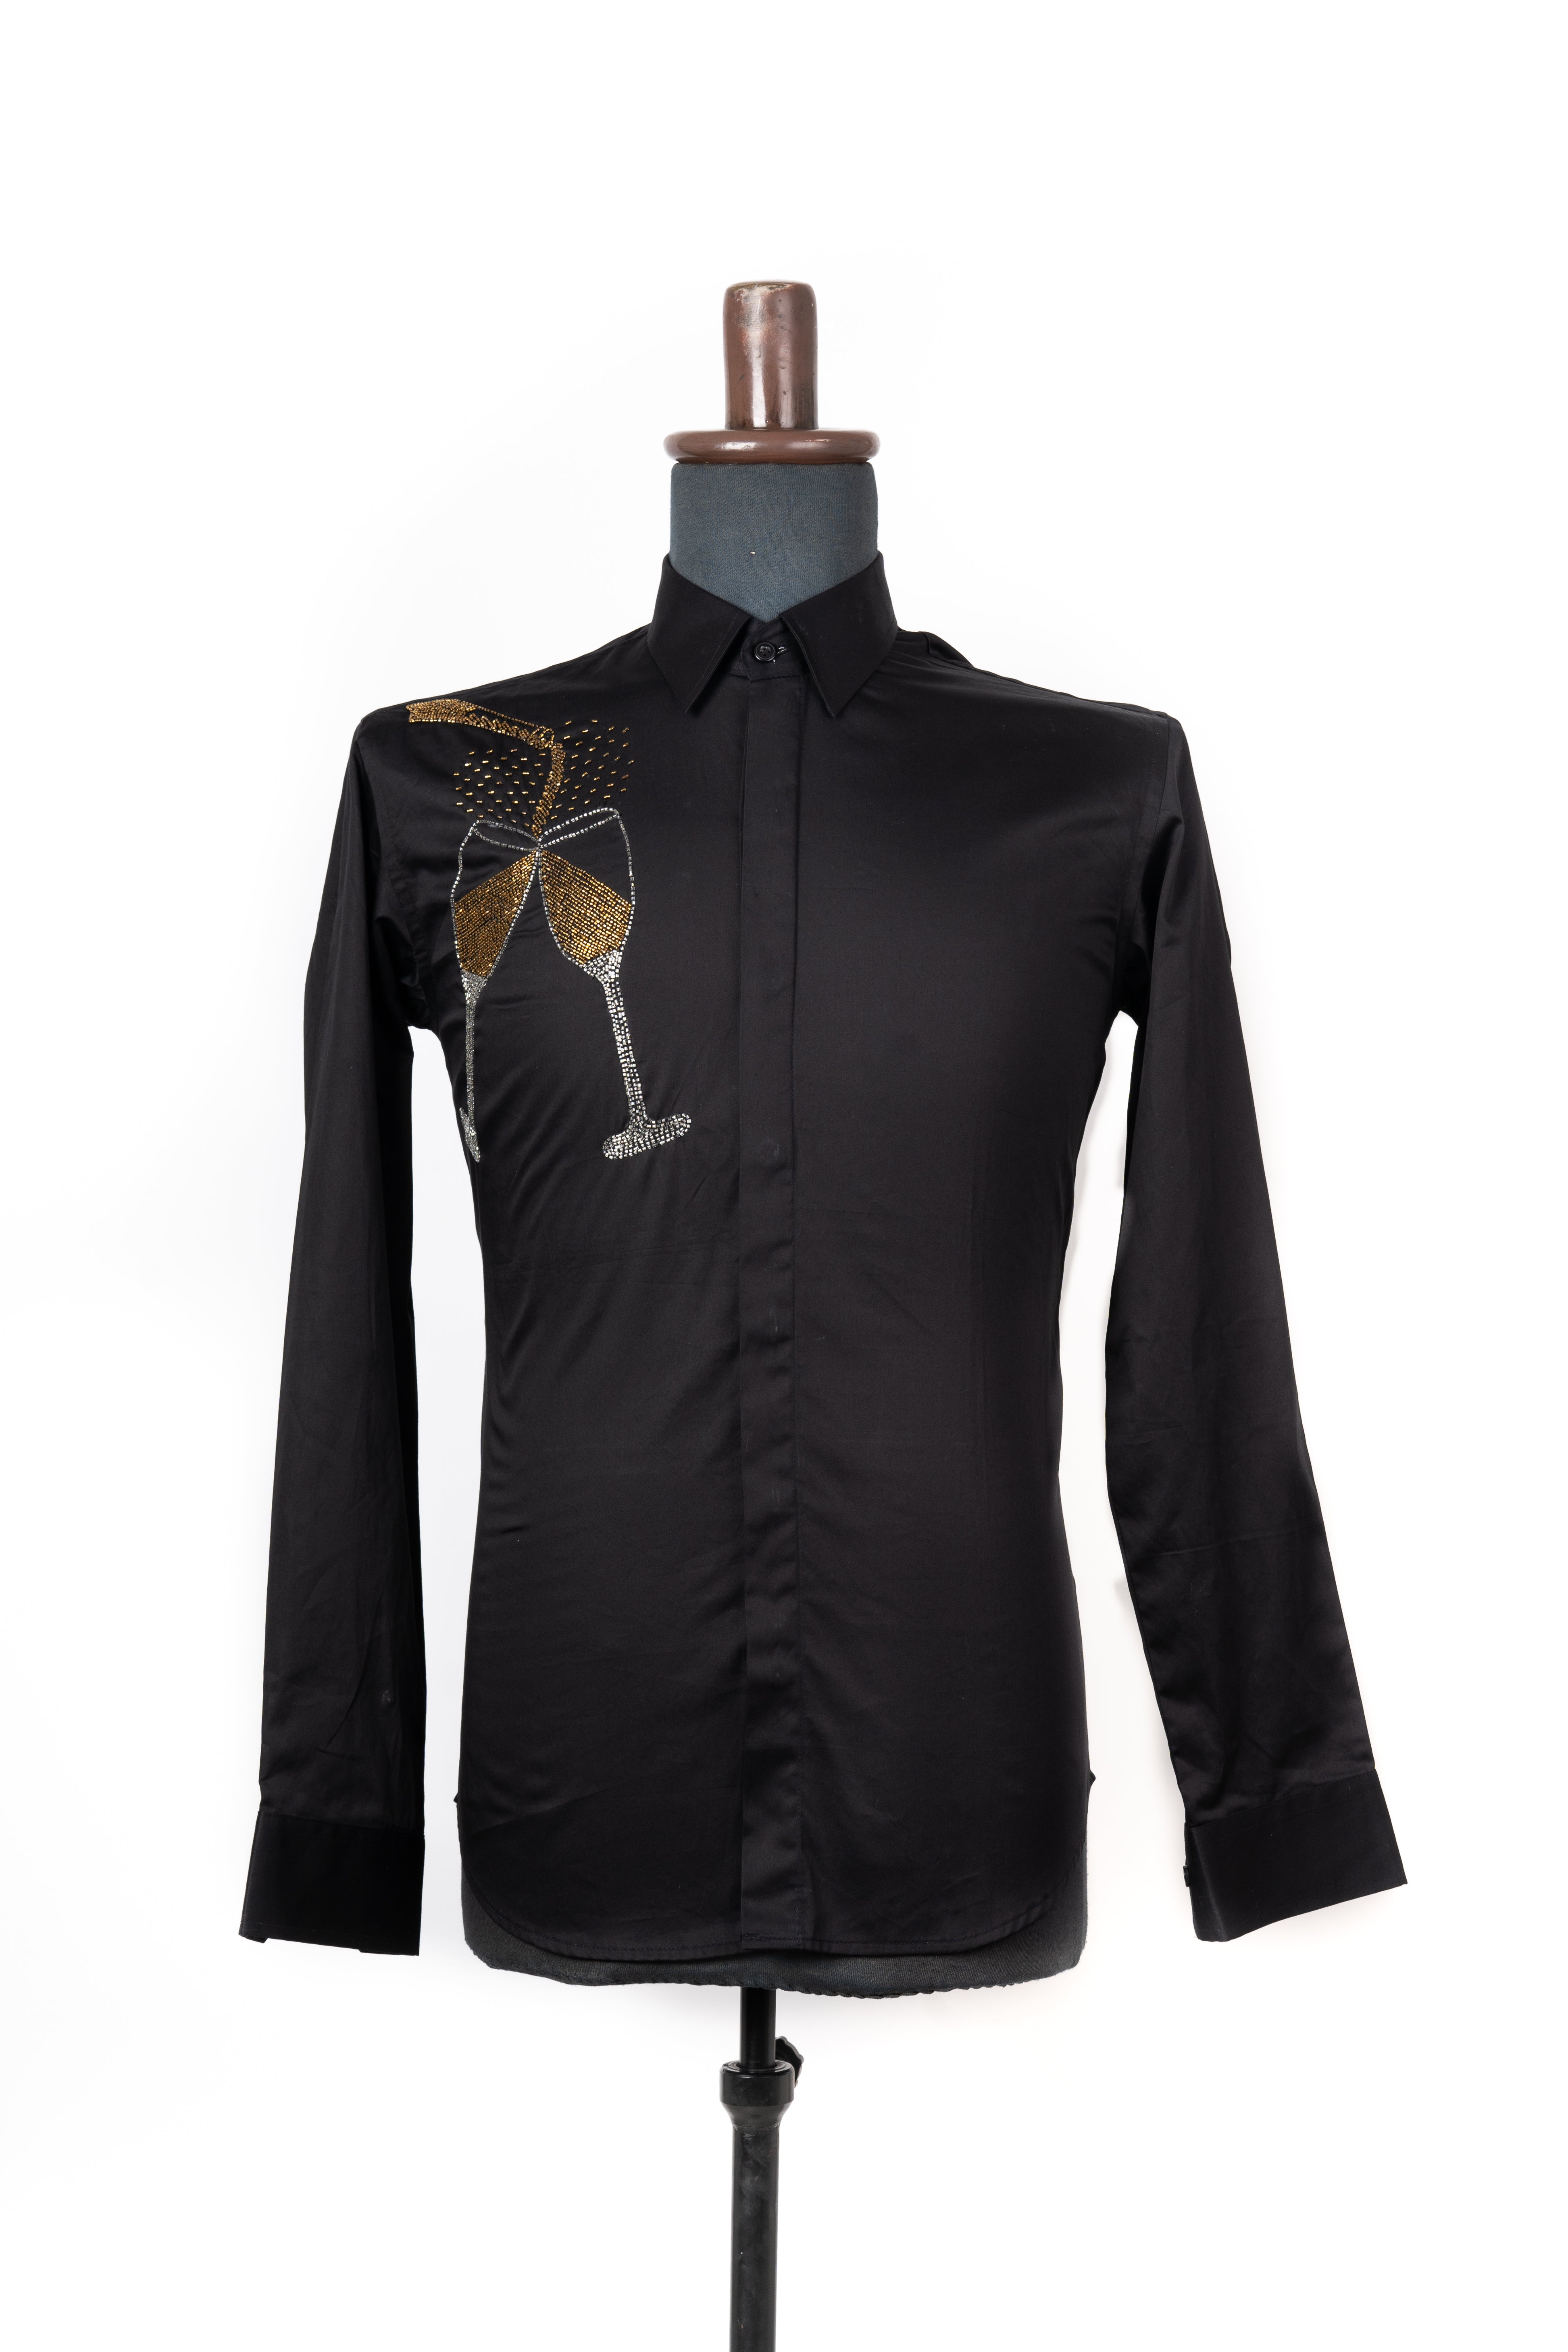 Ideal party wear shirt, with  glitry glass embroidery